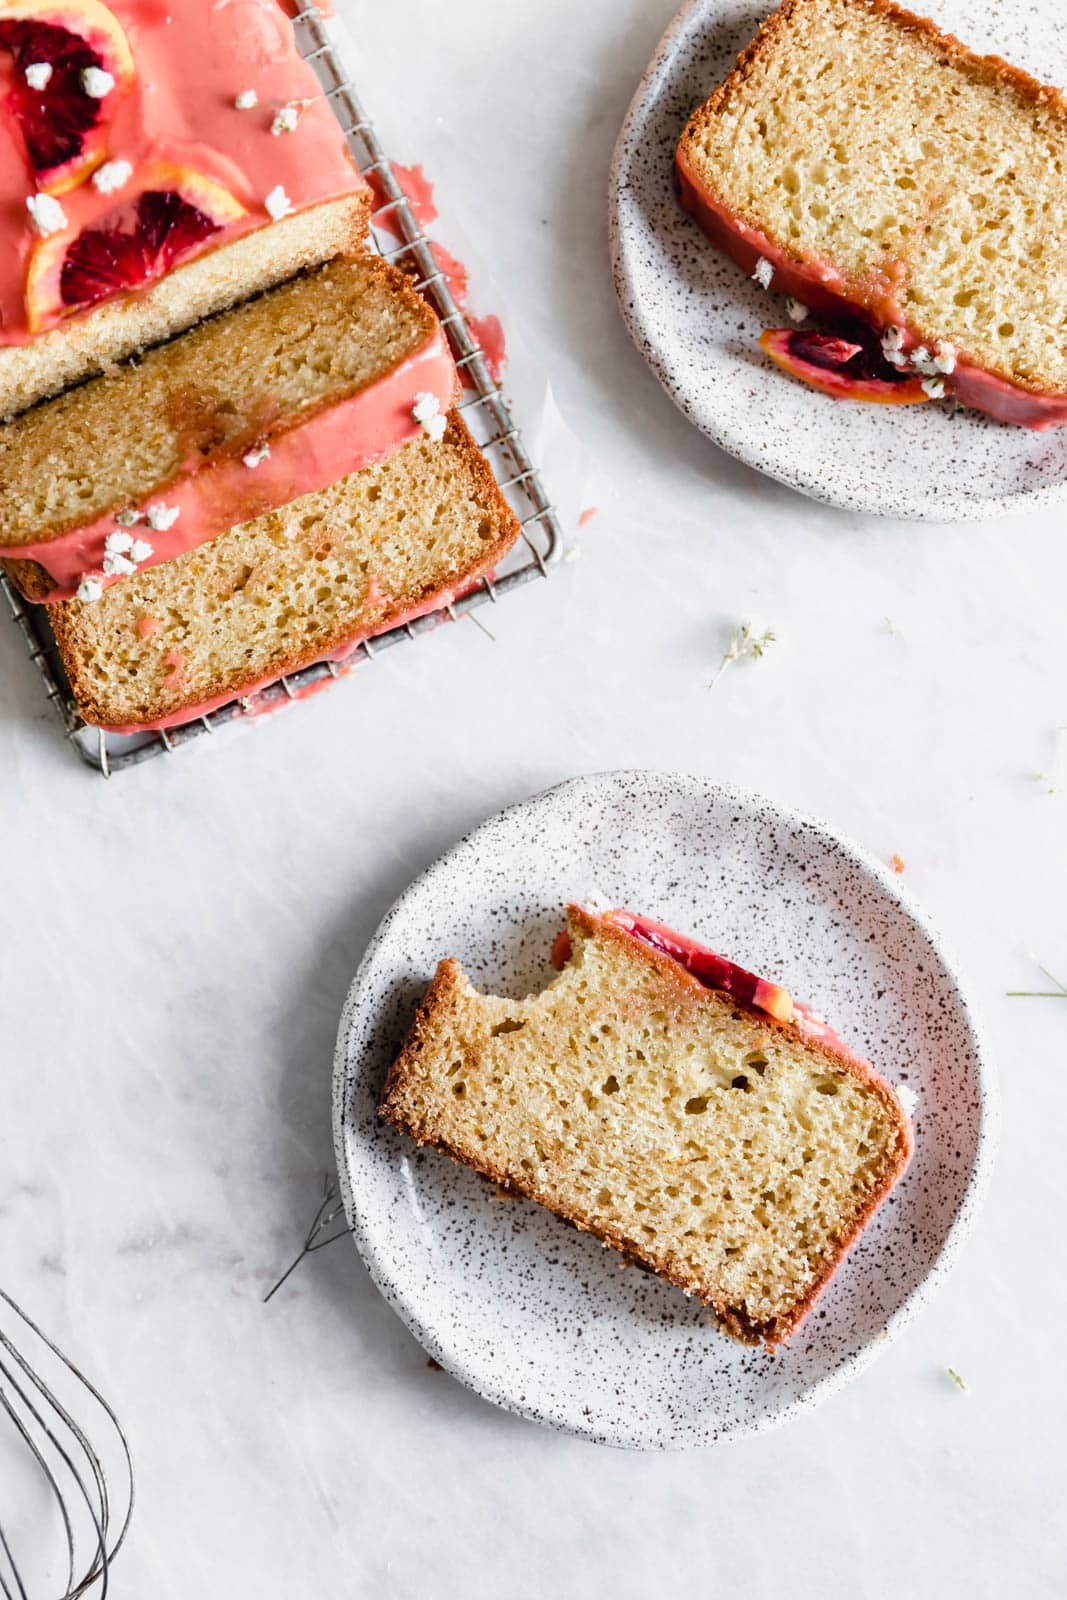 Celebrate citrus season with this beautiful blood orange loaf cake made with greek yogurt and topped with the perfect tangy pink glaze.